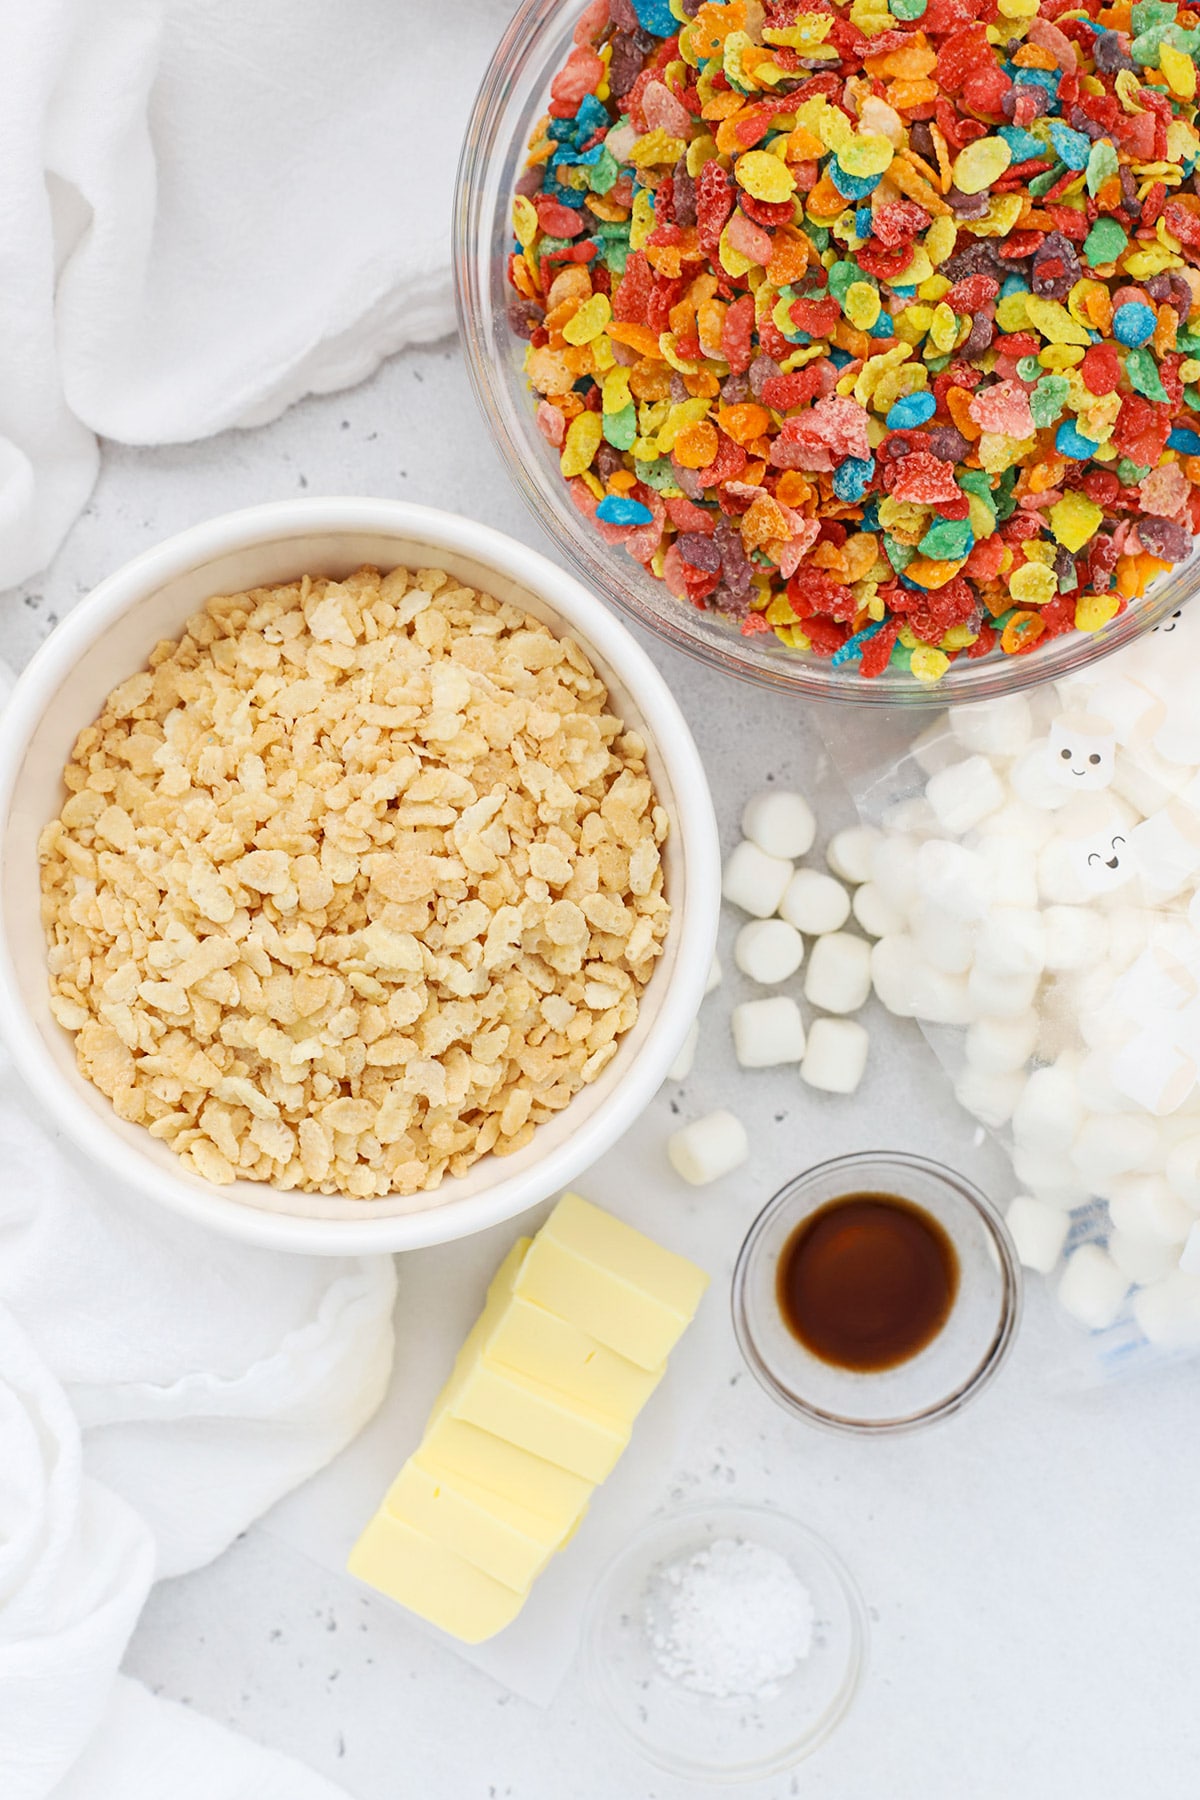 Overhead view of ingredients to make gluten-free fruity pebbles treats